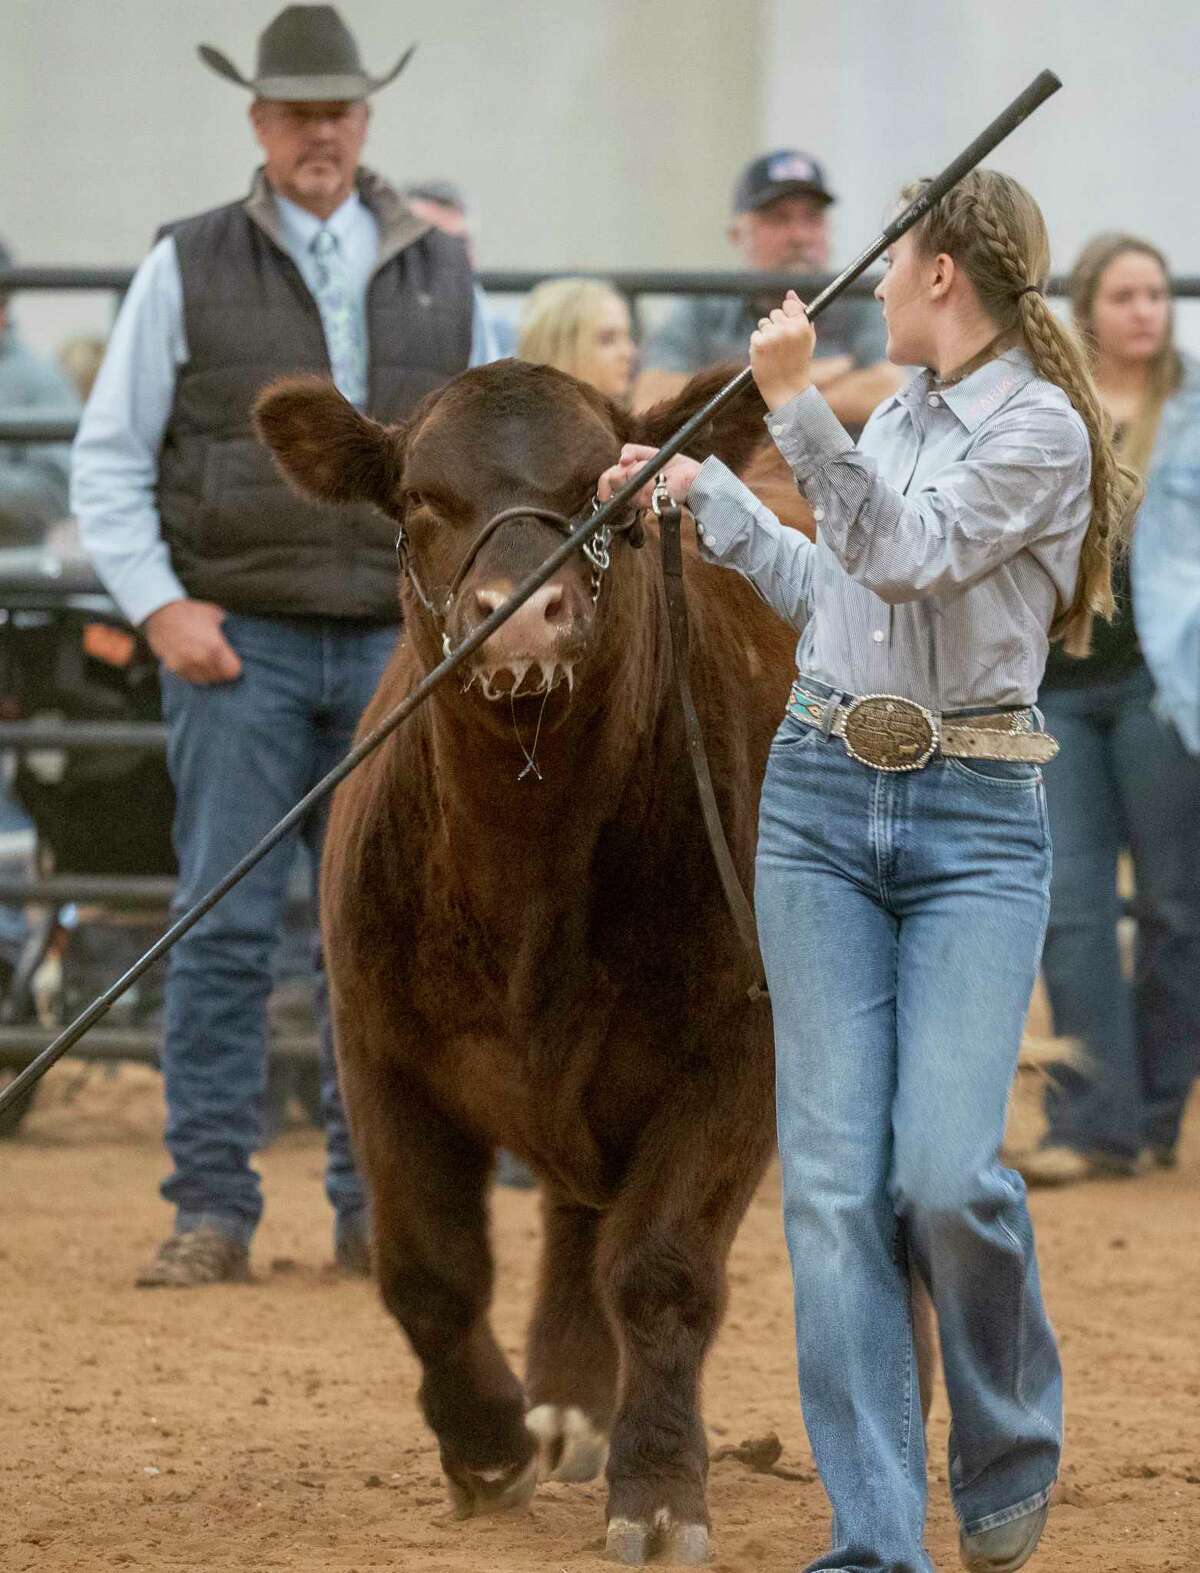 Area FFA youth show off years of work with their steers 01/14/2022 during the Midland County Livestock Association Show at the Midland County Arena. Tim Fischer/Reporter-Telegram